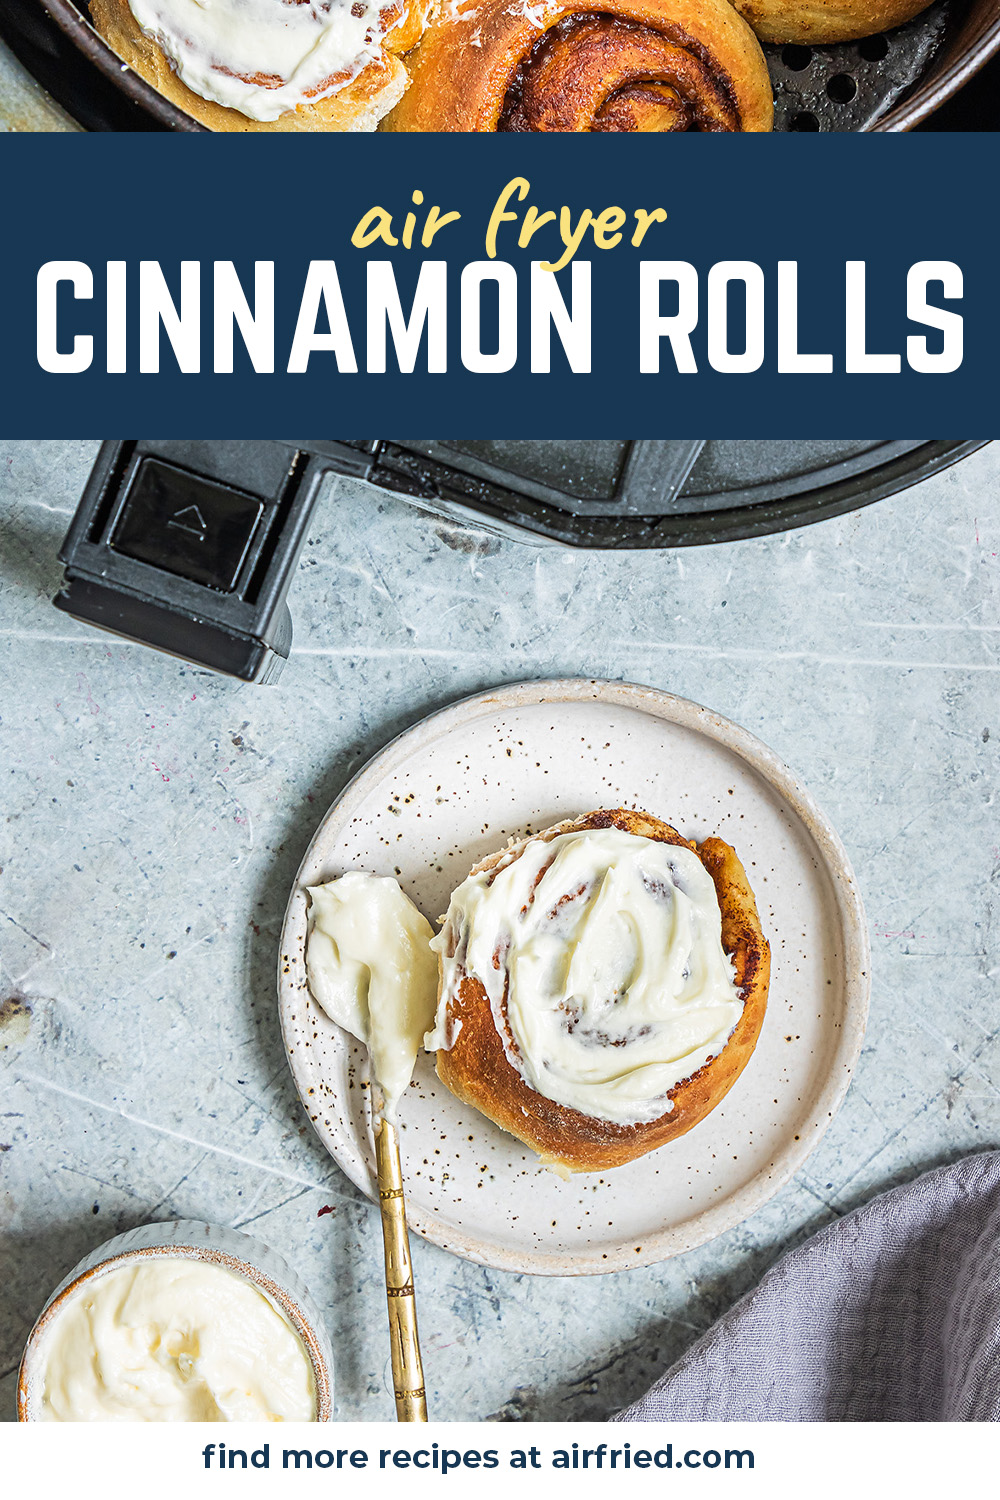 These made from scratch cinnamon rolls have a dough that is easy to work with and a homemade frosting that is perfect for cinnamon rolls!